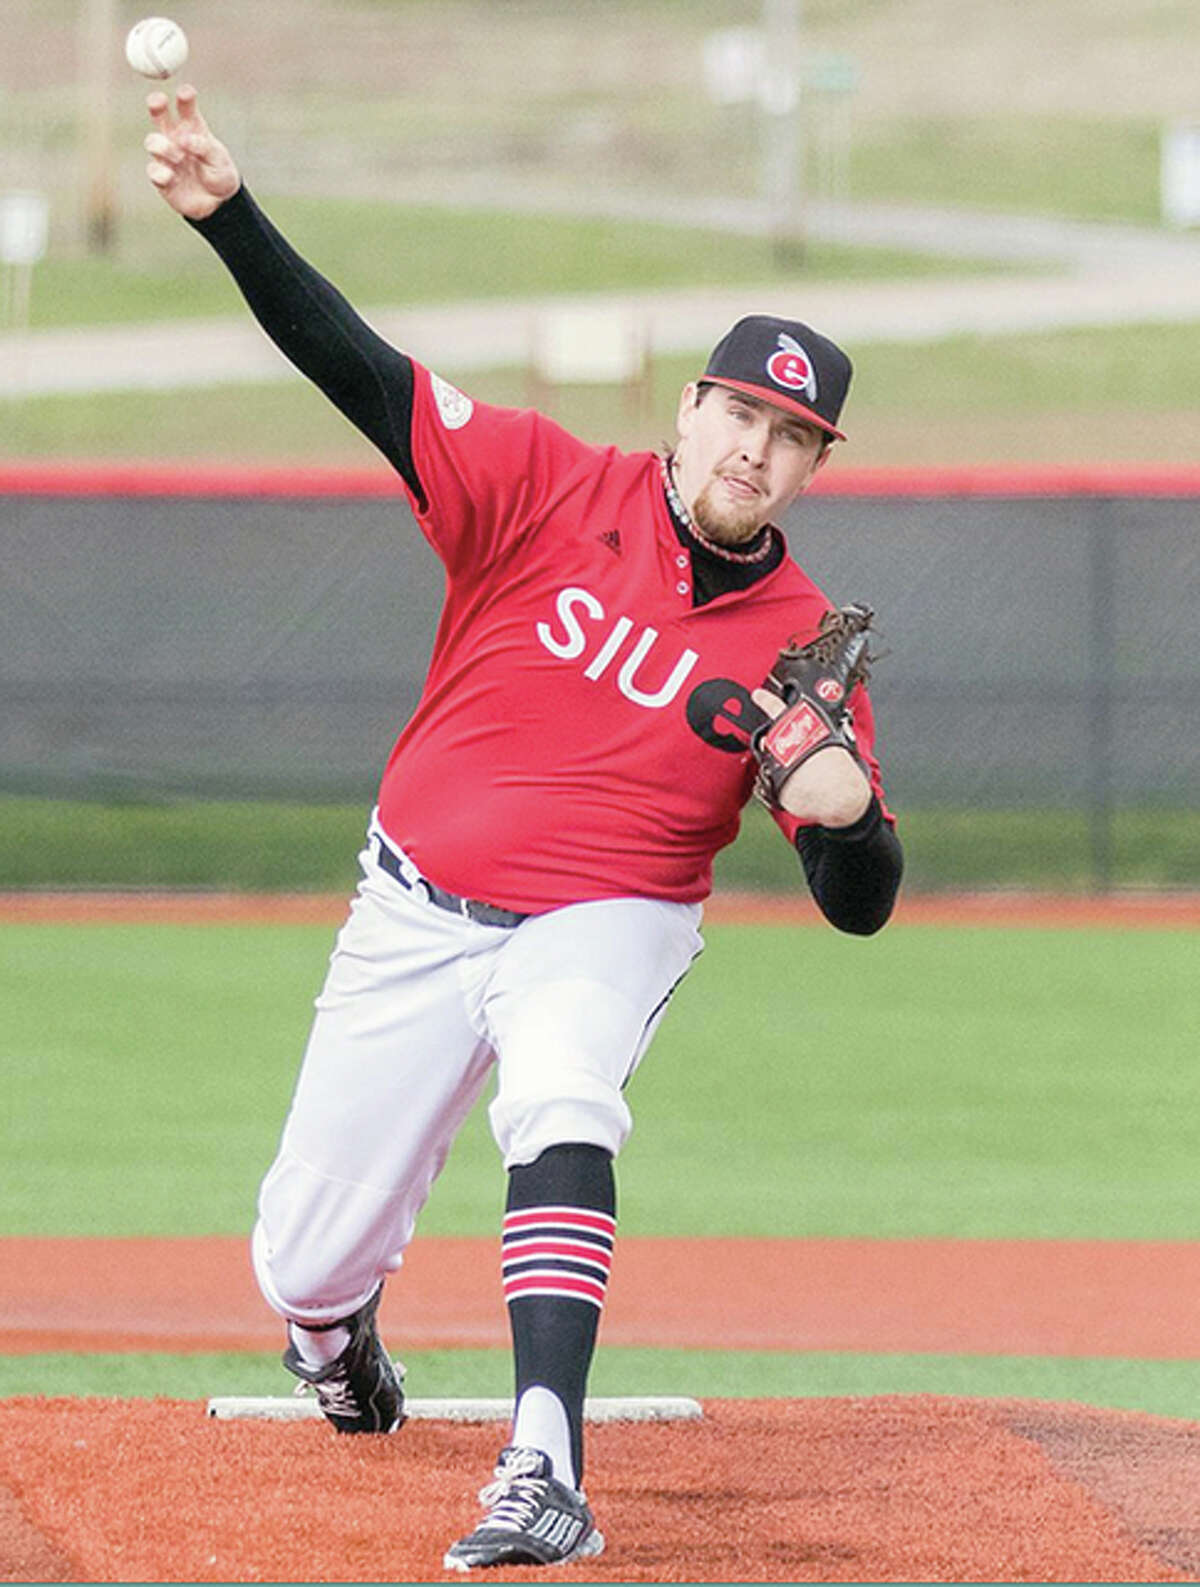 SIUE’s P.J. Schuster tossed his first complete game Thursday, but it came in a 3-2 loss to Eastern Illinois University in Charleston.